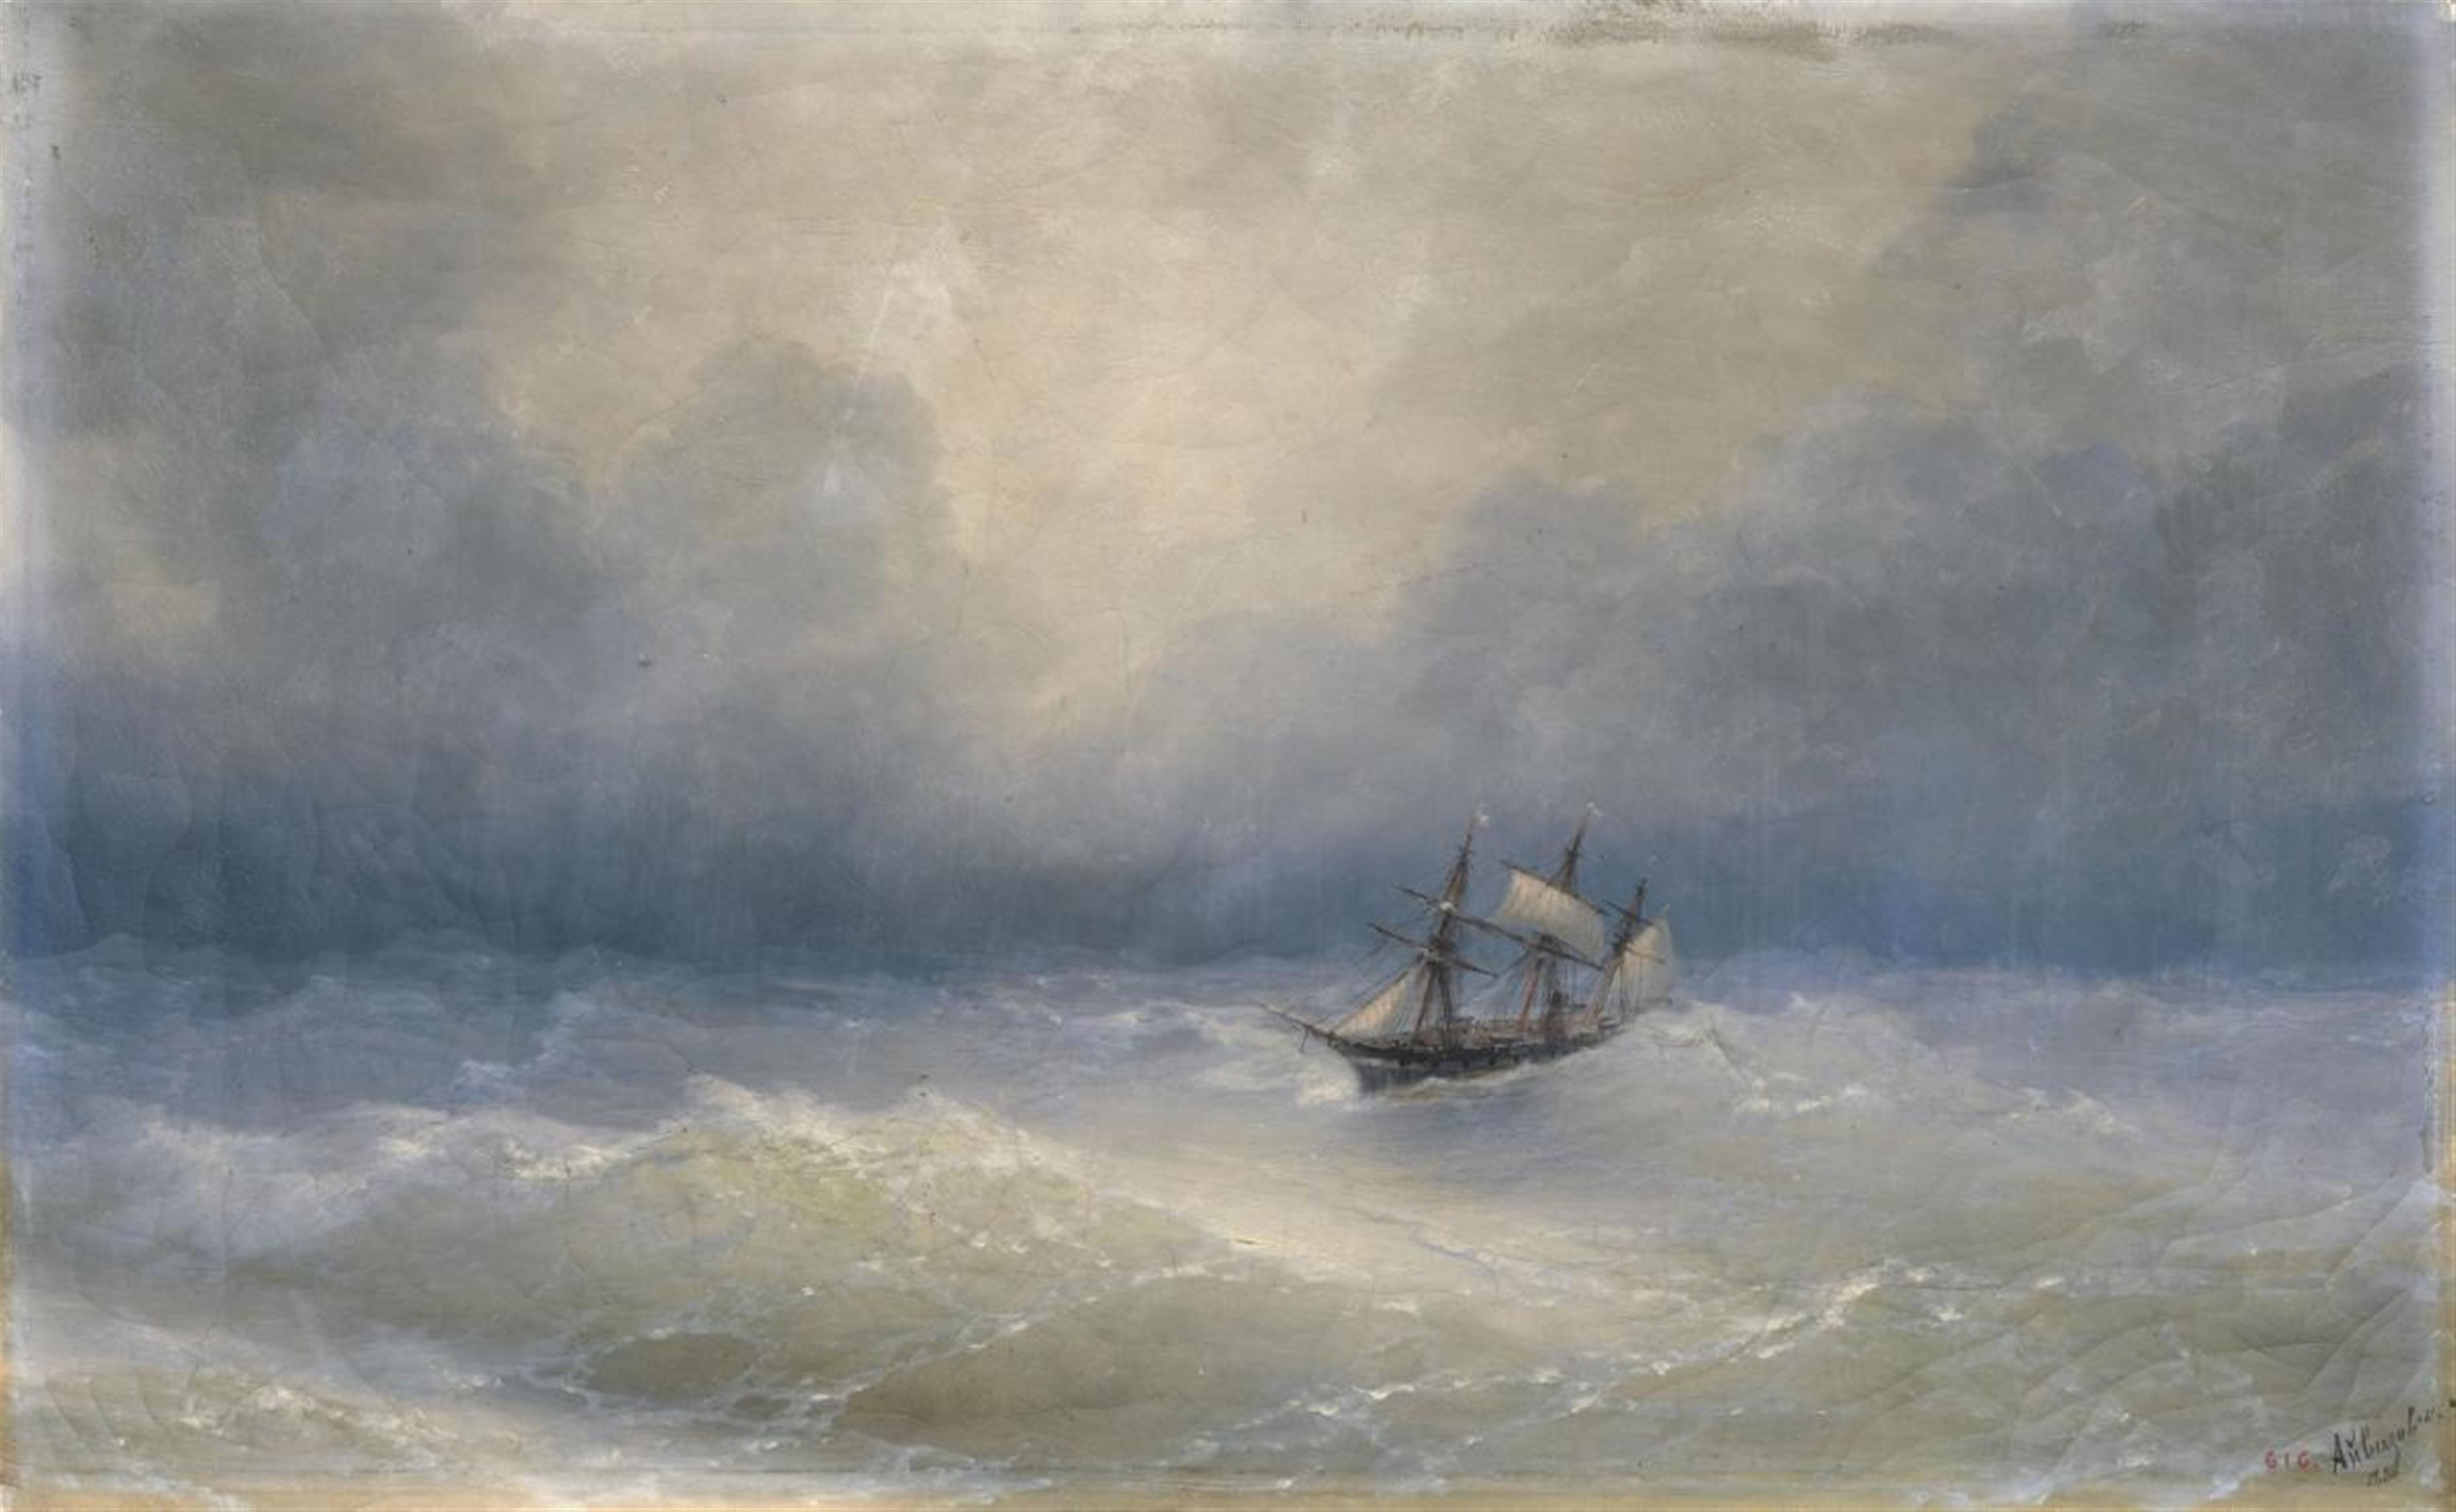 Iwan Konstantinowitsch Aivazovsky - SAILING SHIP ON STORMY SEA - image-1